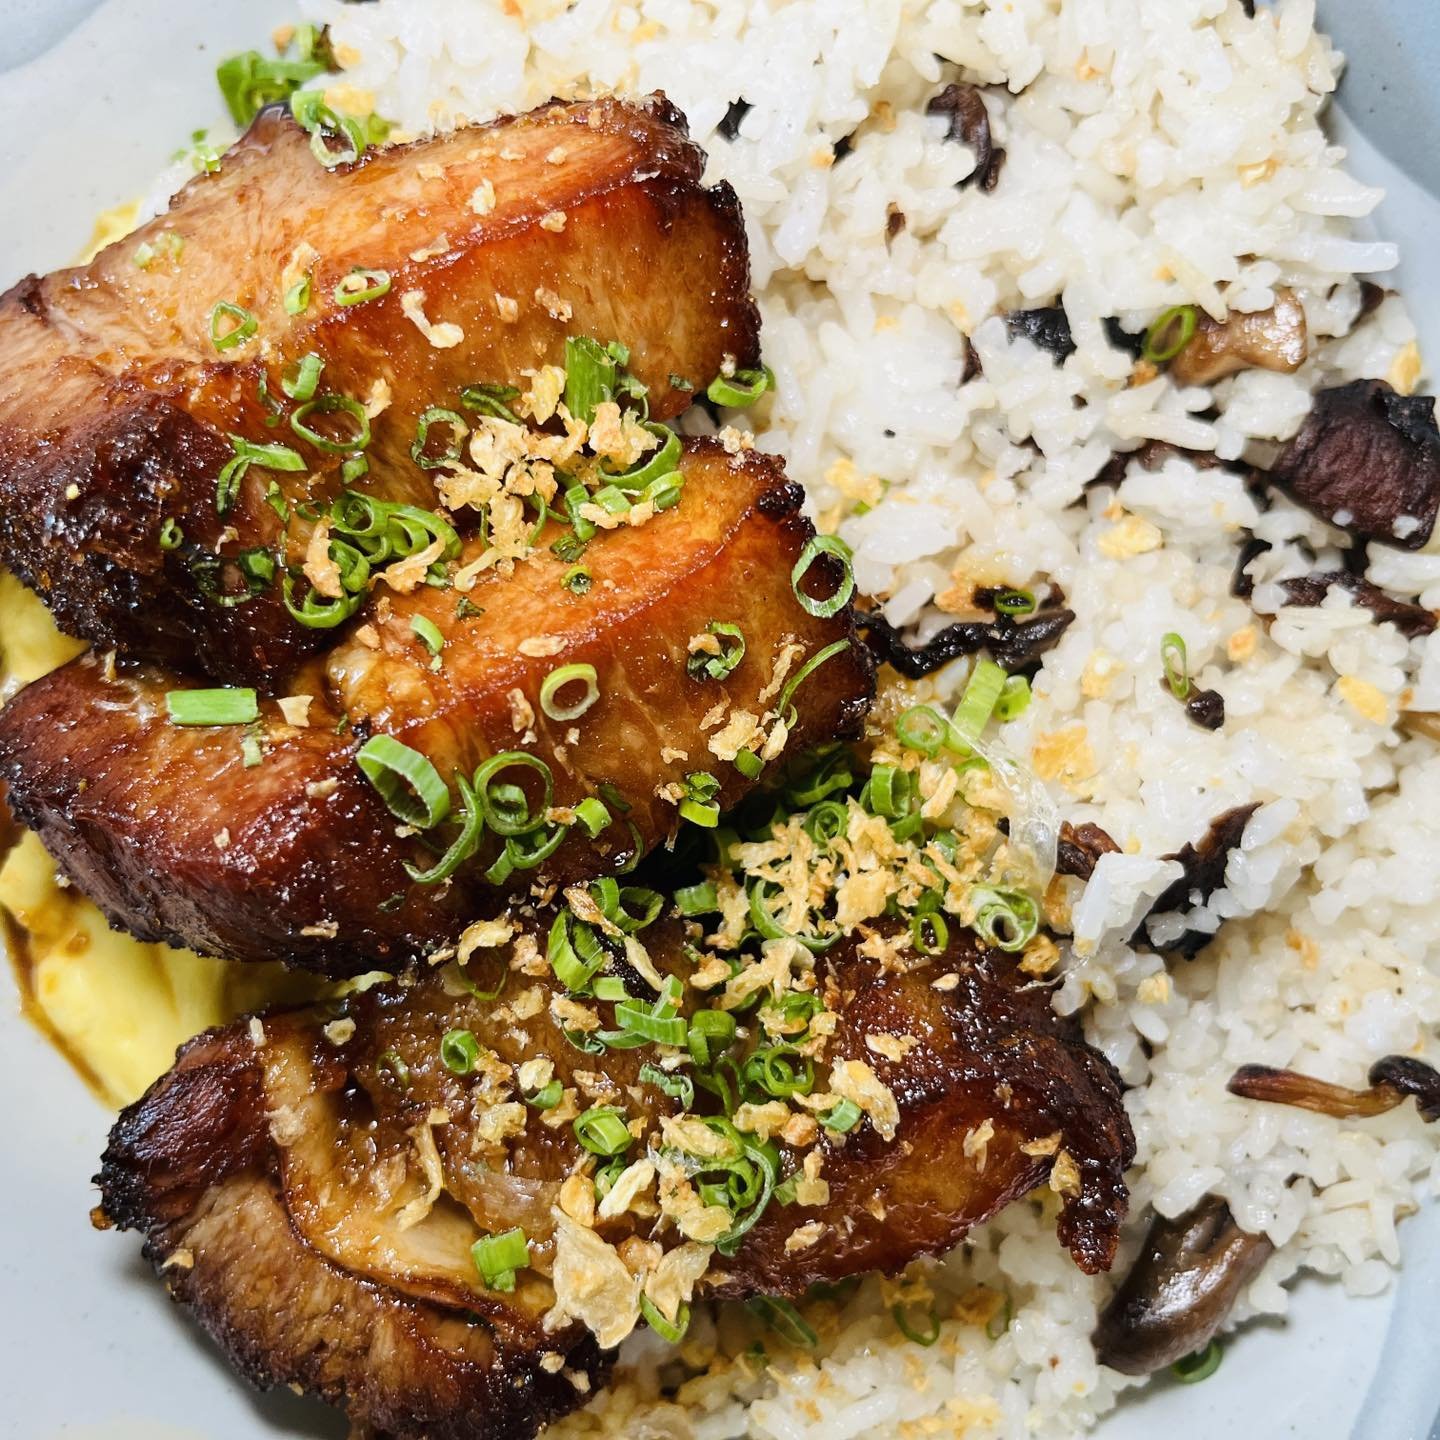 I HAVE A NEW FAVORITE AT BUNGALOW!

It&rsquo;s been a while since I last visited Bungalow Cafe &amp; Bakery (@bungalowcafe), and I found my new favorite dish there: Pineapple Glazed Belly! The pork belly is tender and fatty, with a balance of sweet a